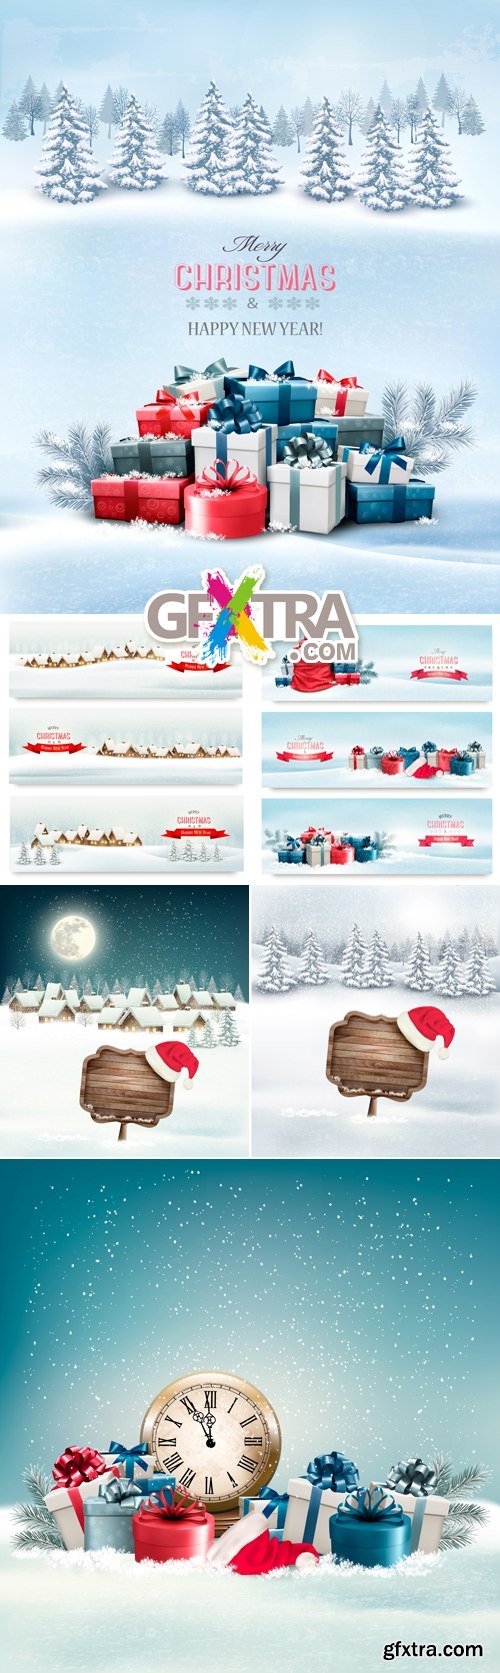 Christmas & New Year 2016 Backgrounds & Banners Vector